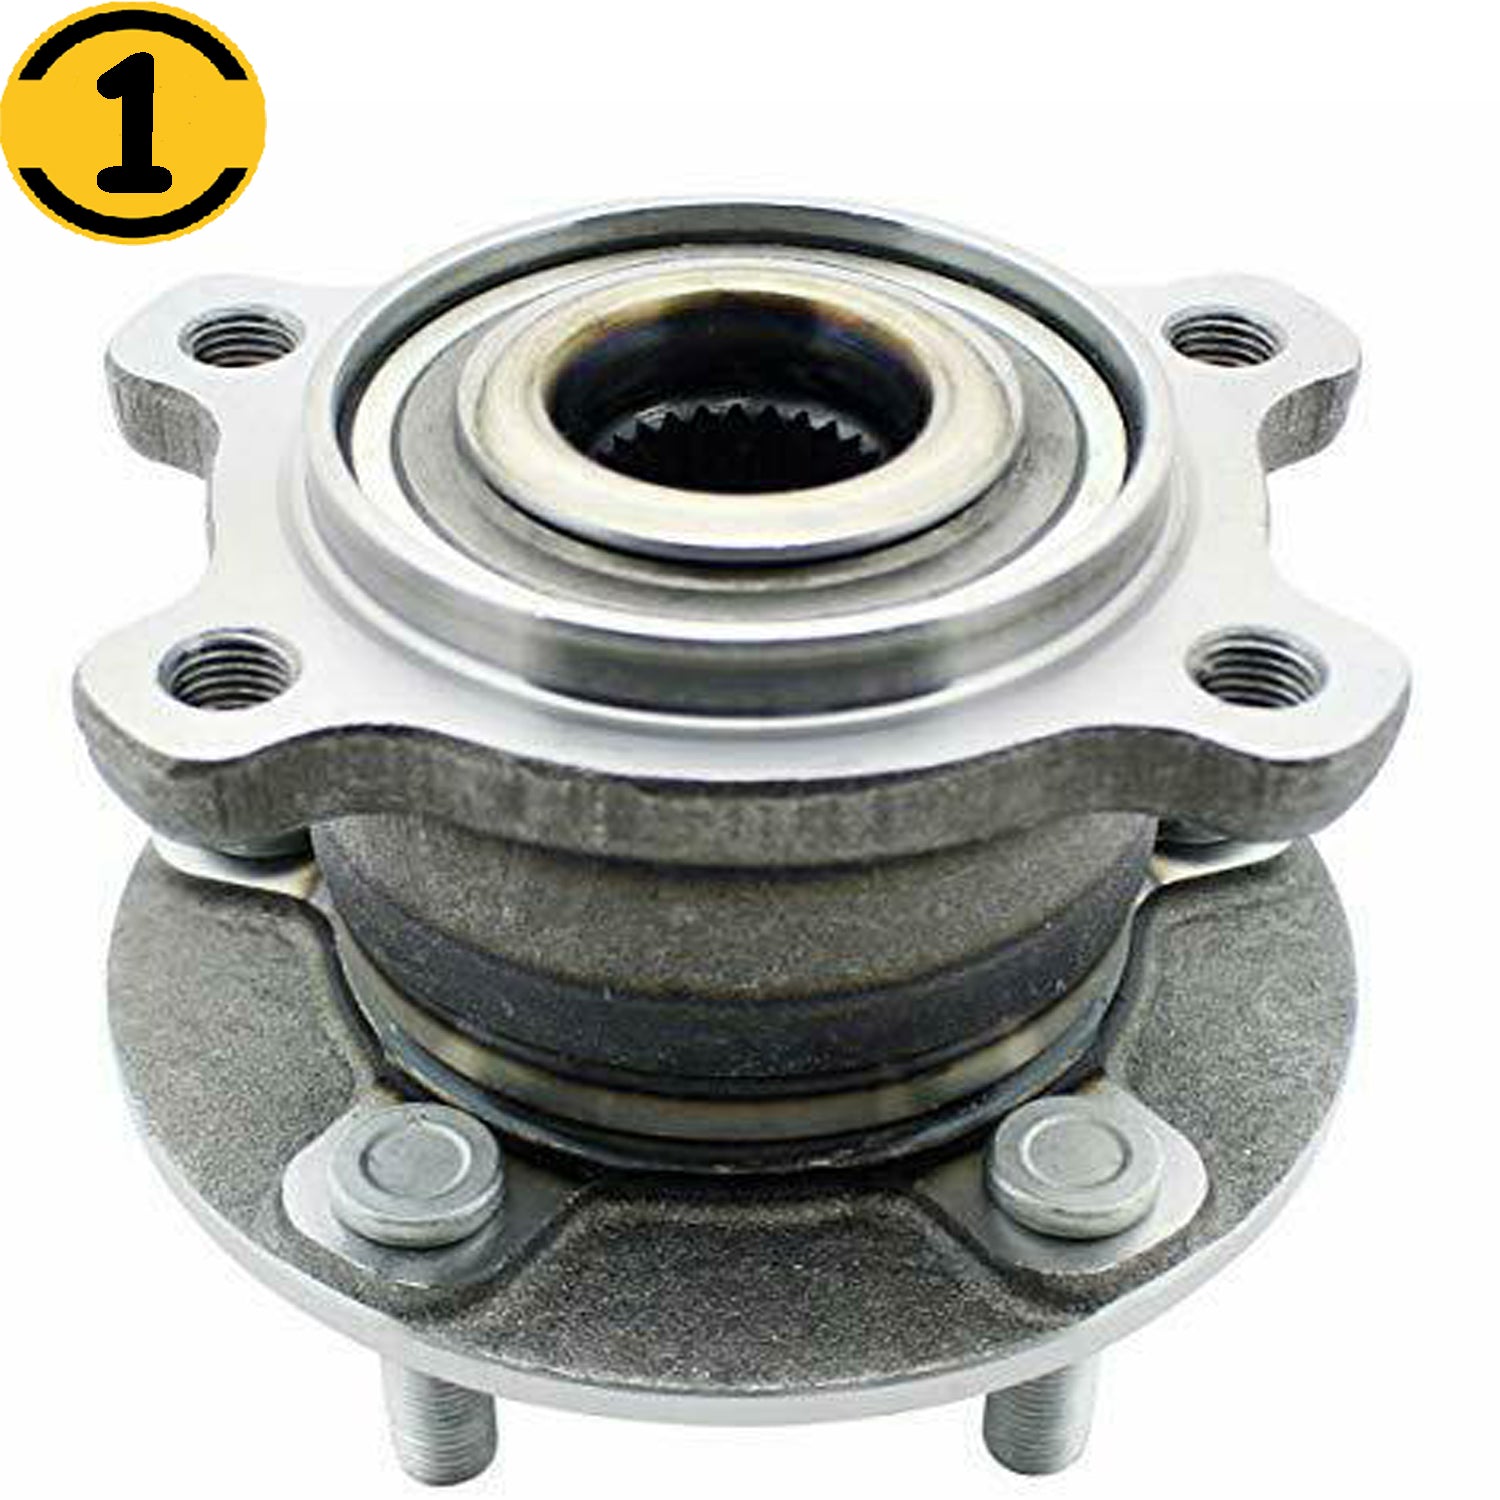 JADODE Rear Wheel Bearing & Hub Assembly For Ford Escape & Lincoln MKC All Wheel Drive